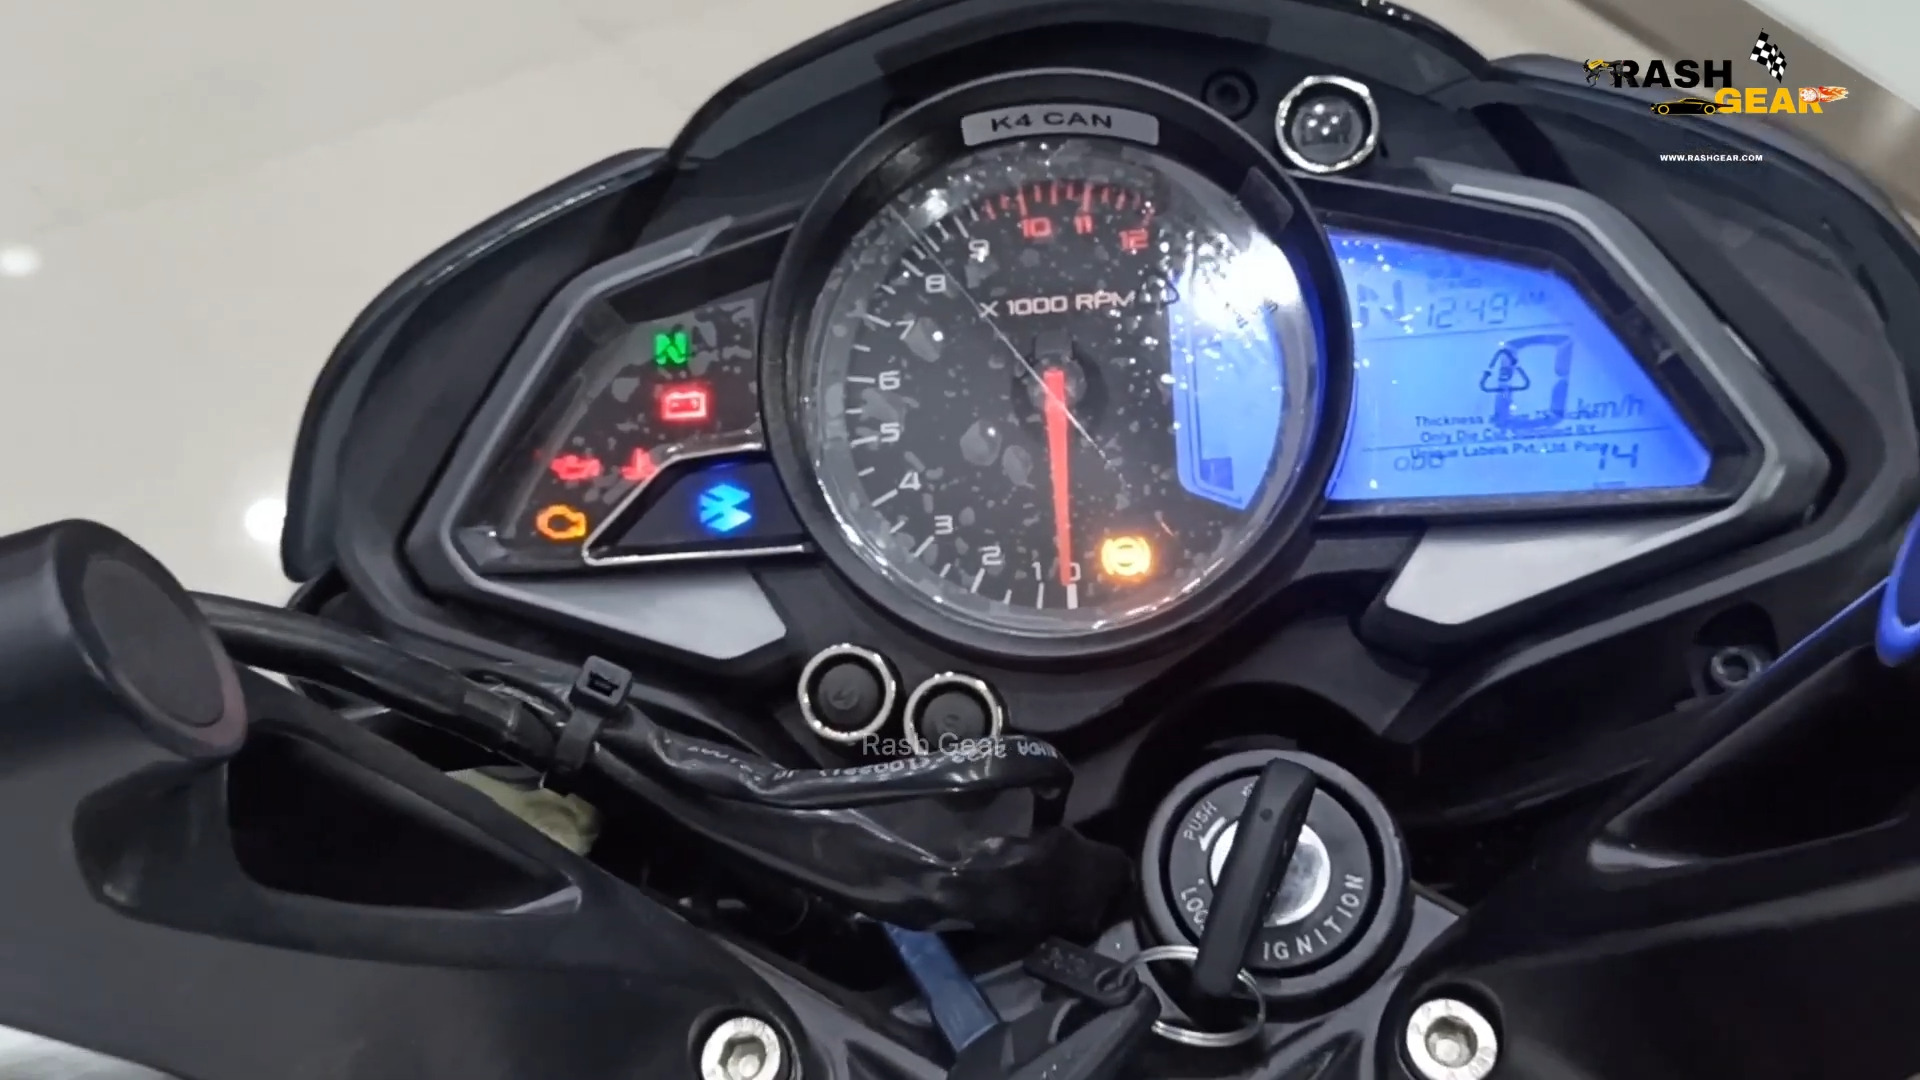 2023 Bajaj Pulsar NS200 Fully Leaked Ahead of Launch in India - close-up